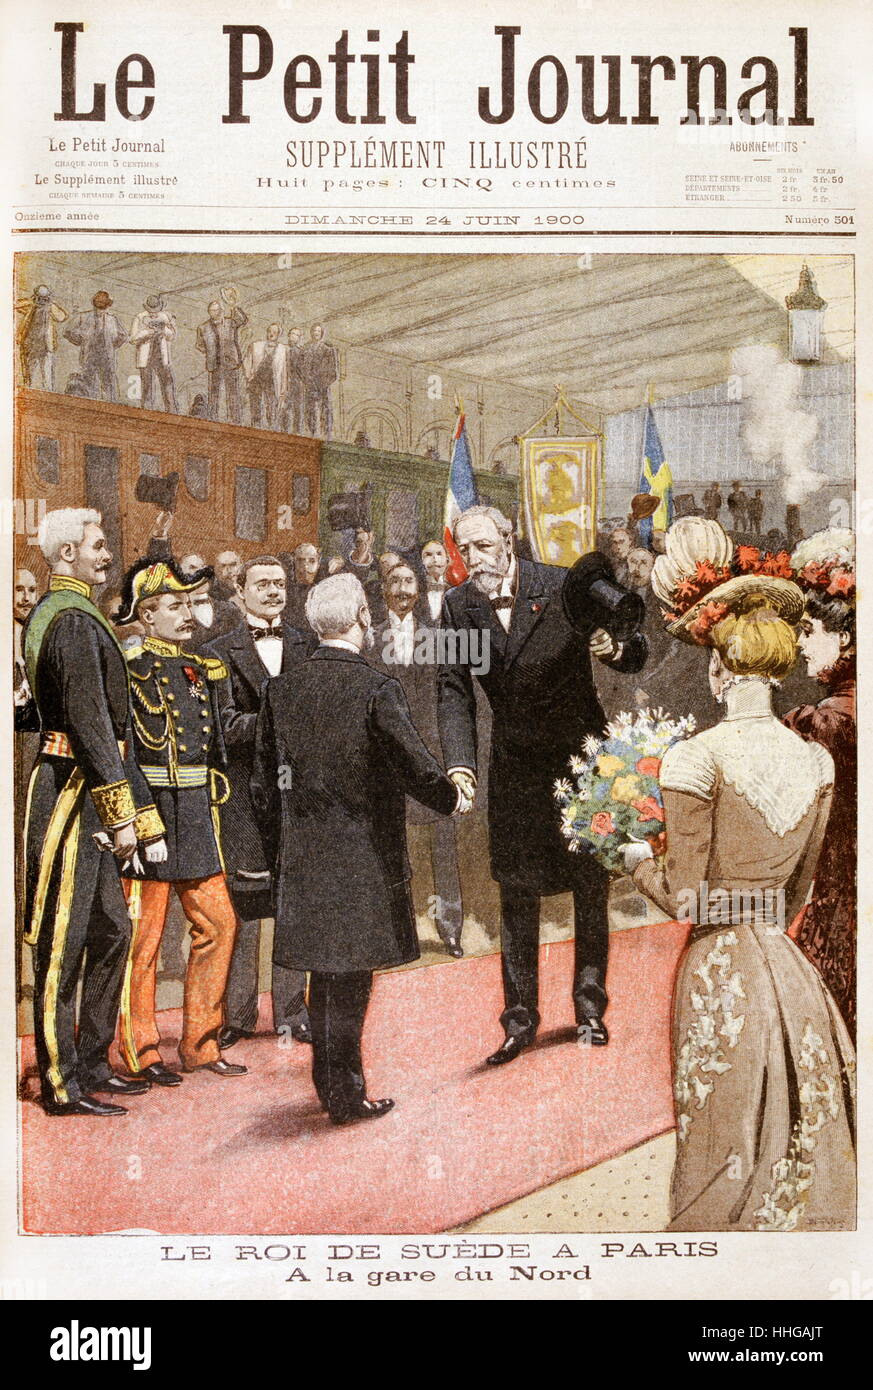 Oscar II, King of Sweden visits France. 1900, King Oscar of Sweden (right) arriving in Paris to visit the Universal Exposition. He is greeted at the Gare du Nord, by President Loubet Stock Photo